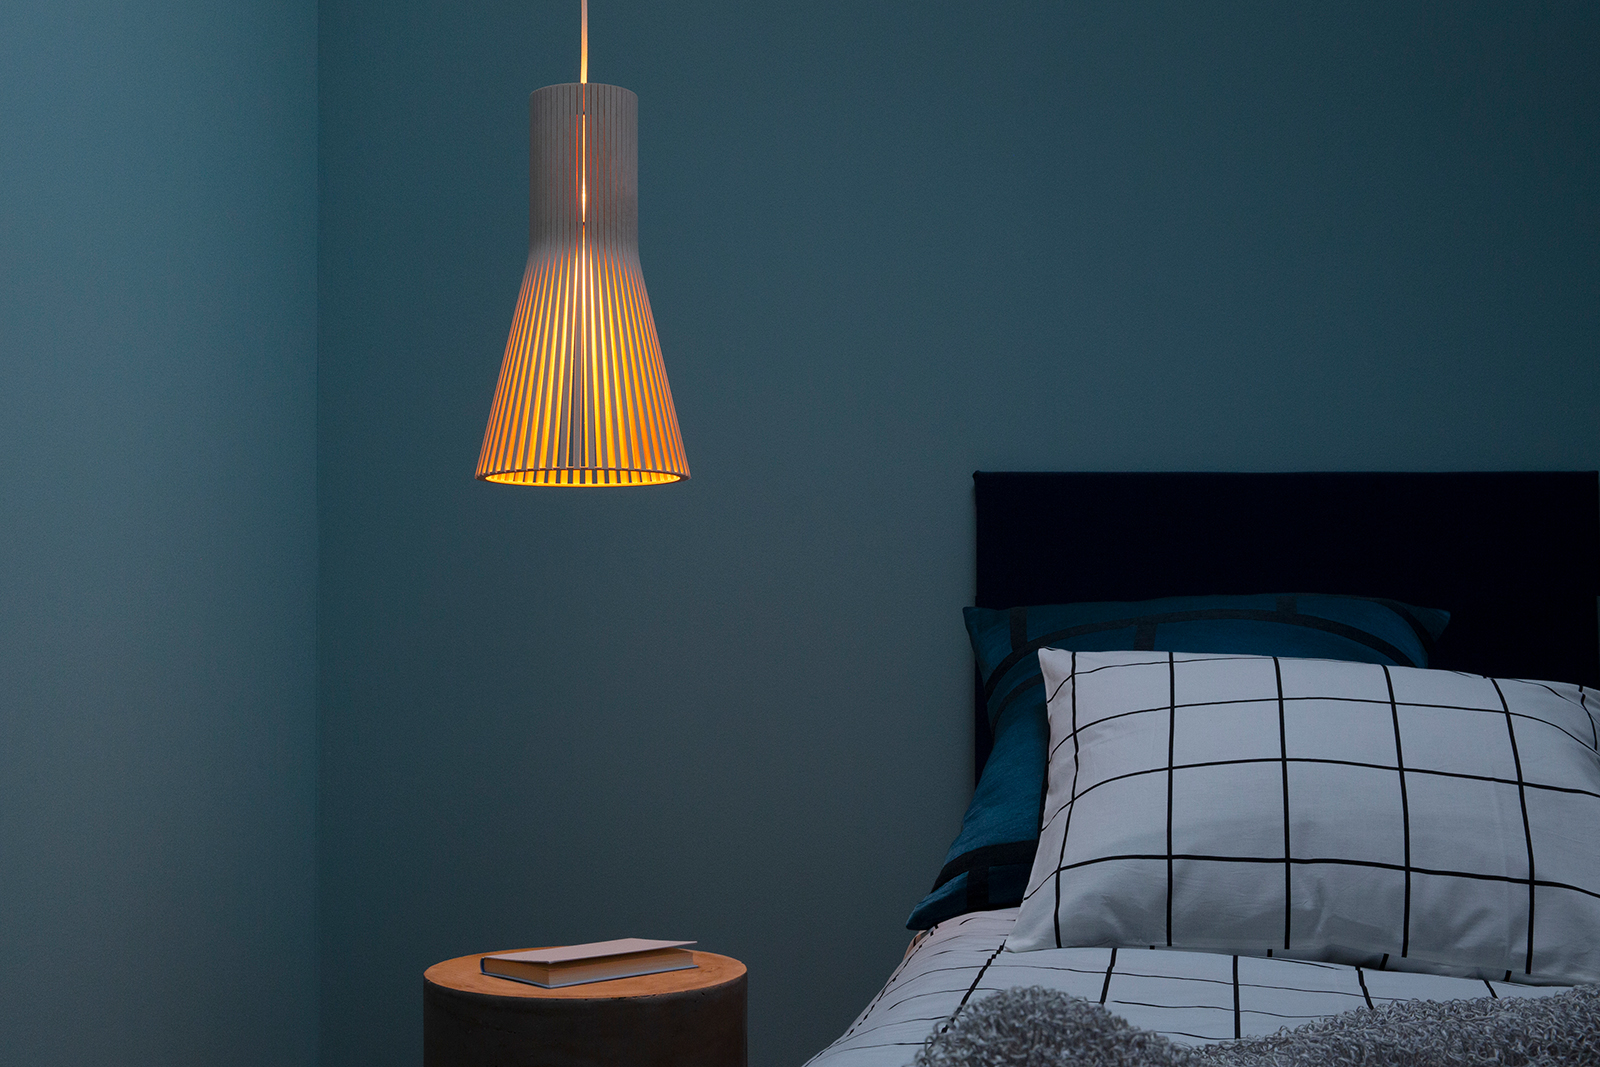 A pendant lamp besides a bed.